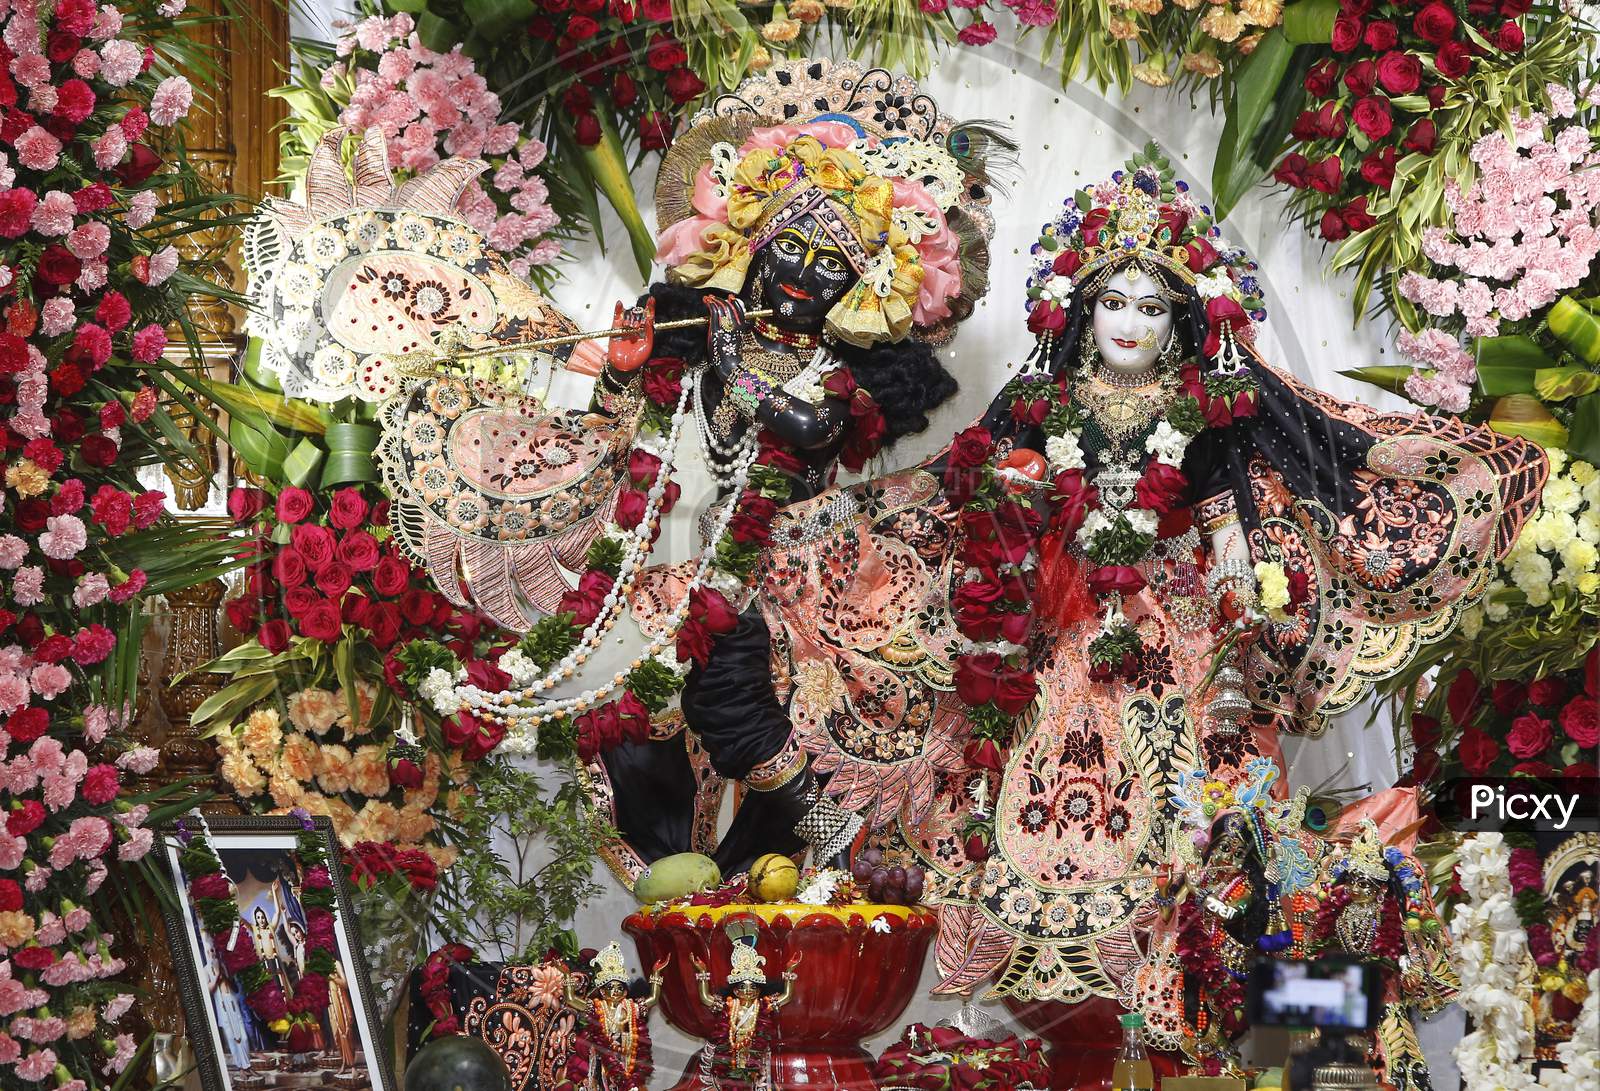 Decorated idols of Hindu Lord Krishna and his Consort Radha are seen in a picture during Janmashtami celebrations at ISKCON  (The International Society for Krishna Consciousness) temple in Chandigarh August 12, 2020